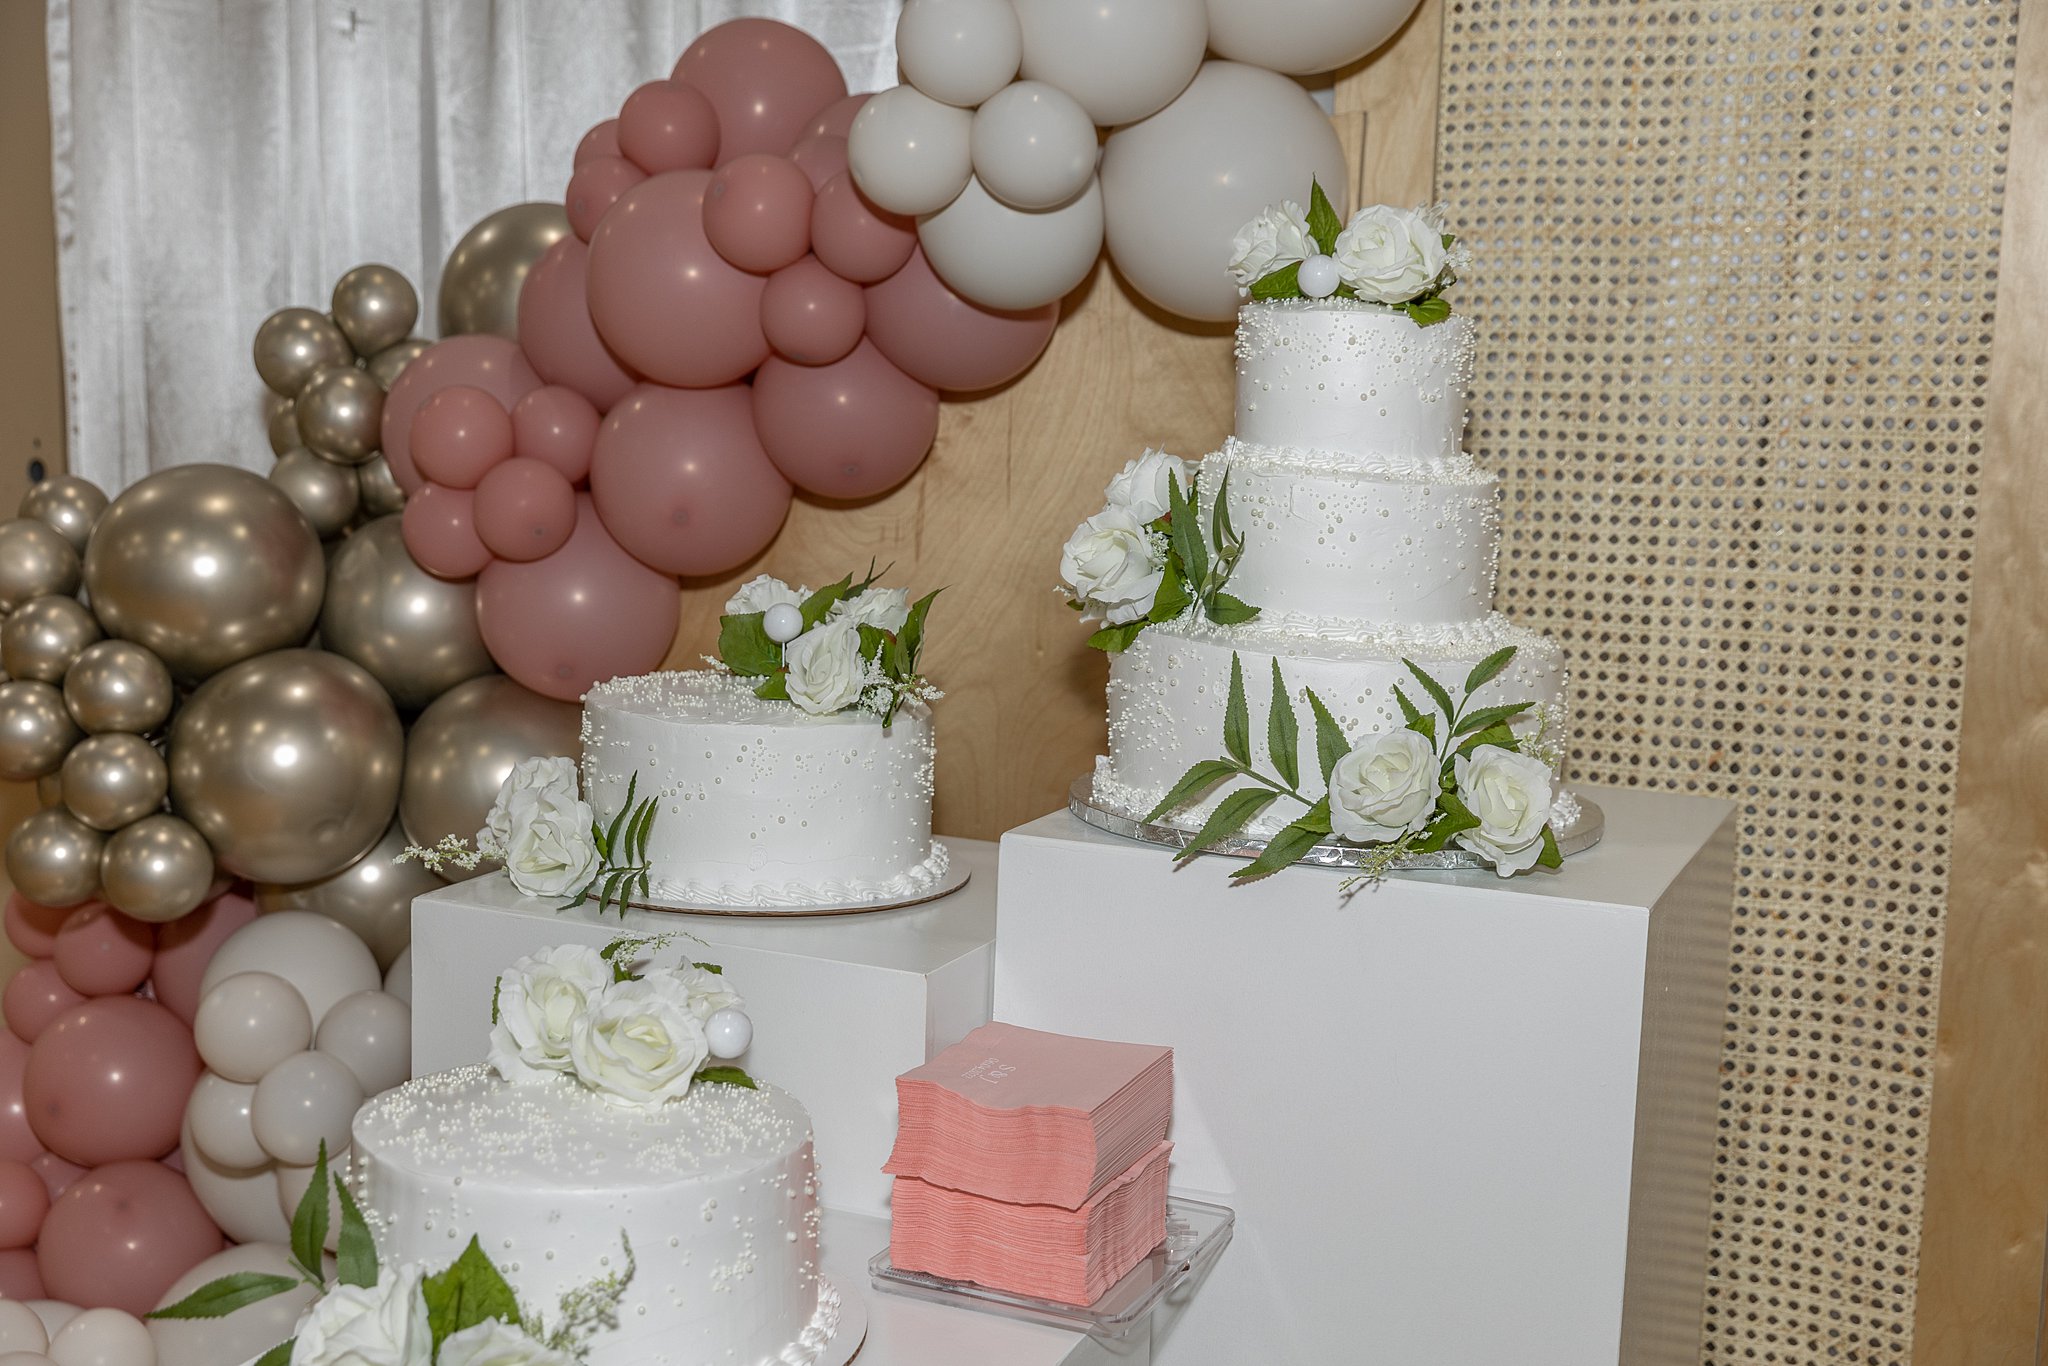 A three-tier white wedding cake sits on a white cube with white roses as decorations next to two other similar cakes the gala lincoln ne